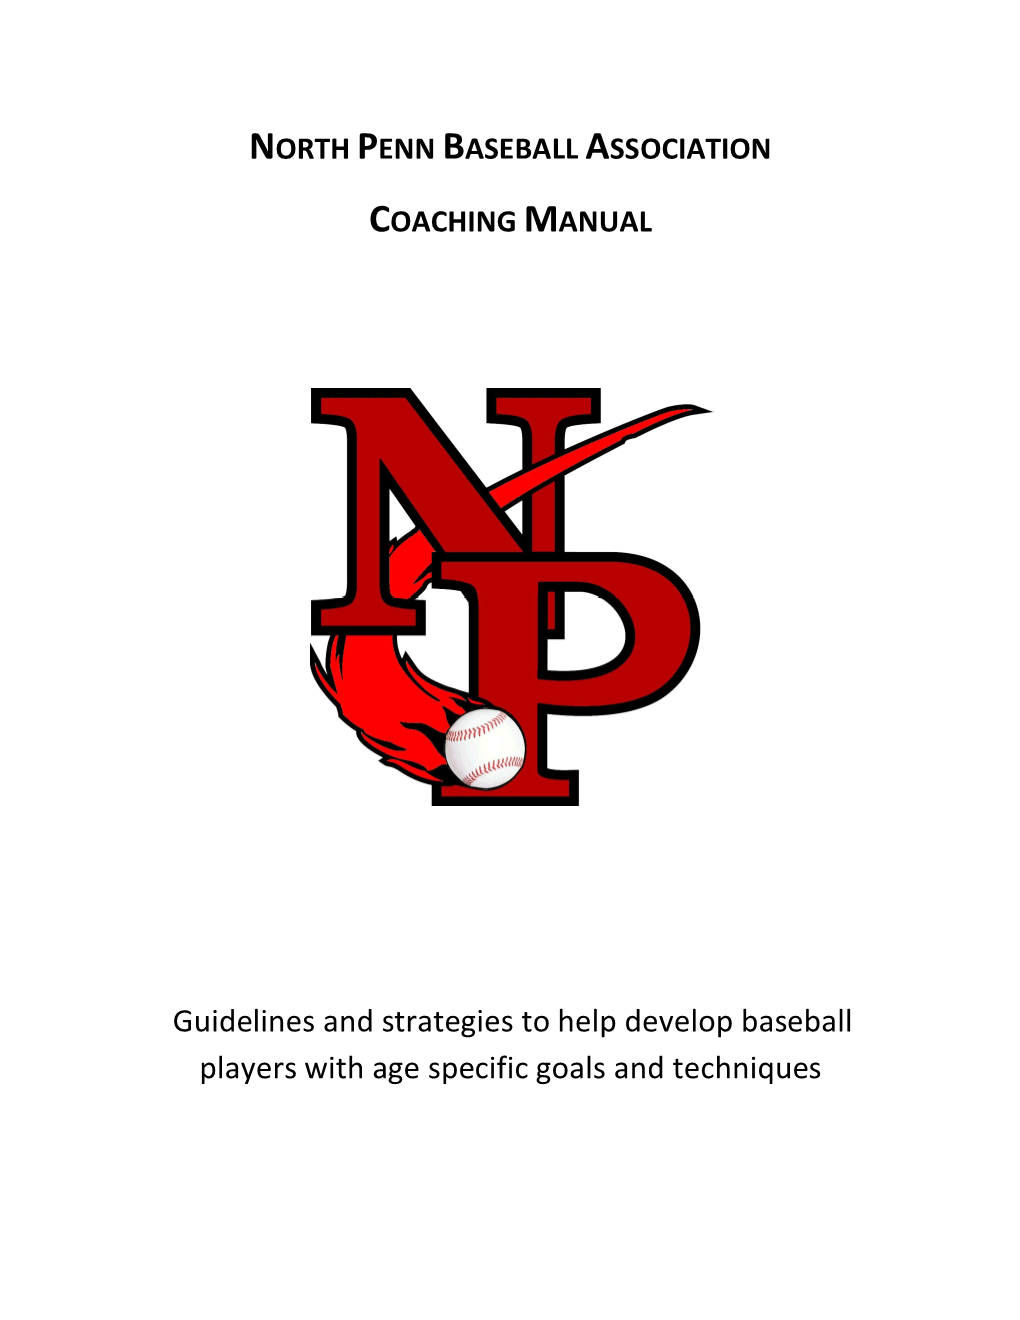 Guidelines and Strategies to Help Develop Baseball Players with Age Specific Goals and Techniques TABLE of CONTENTS